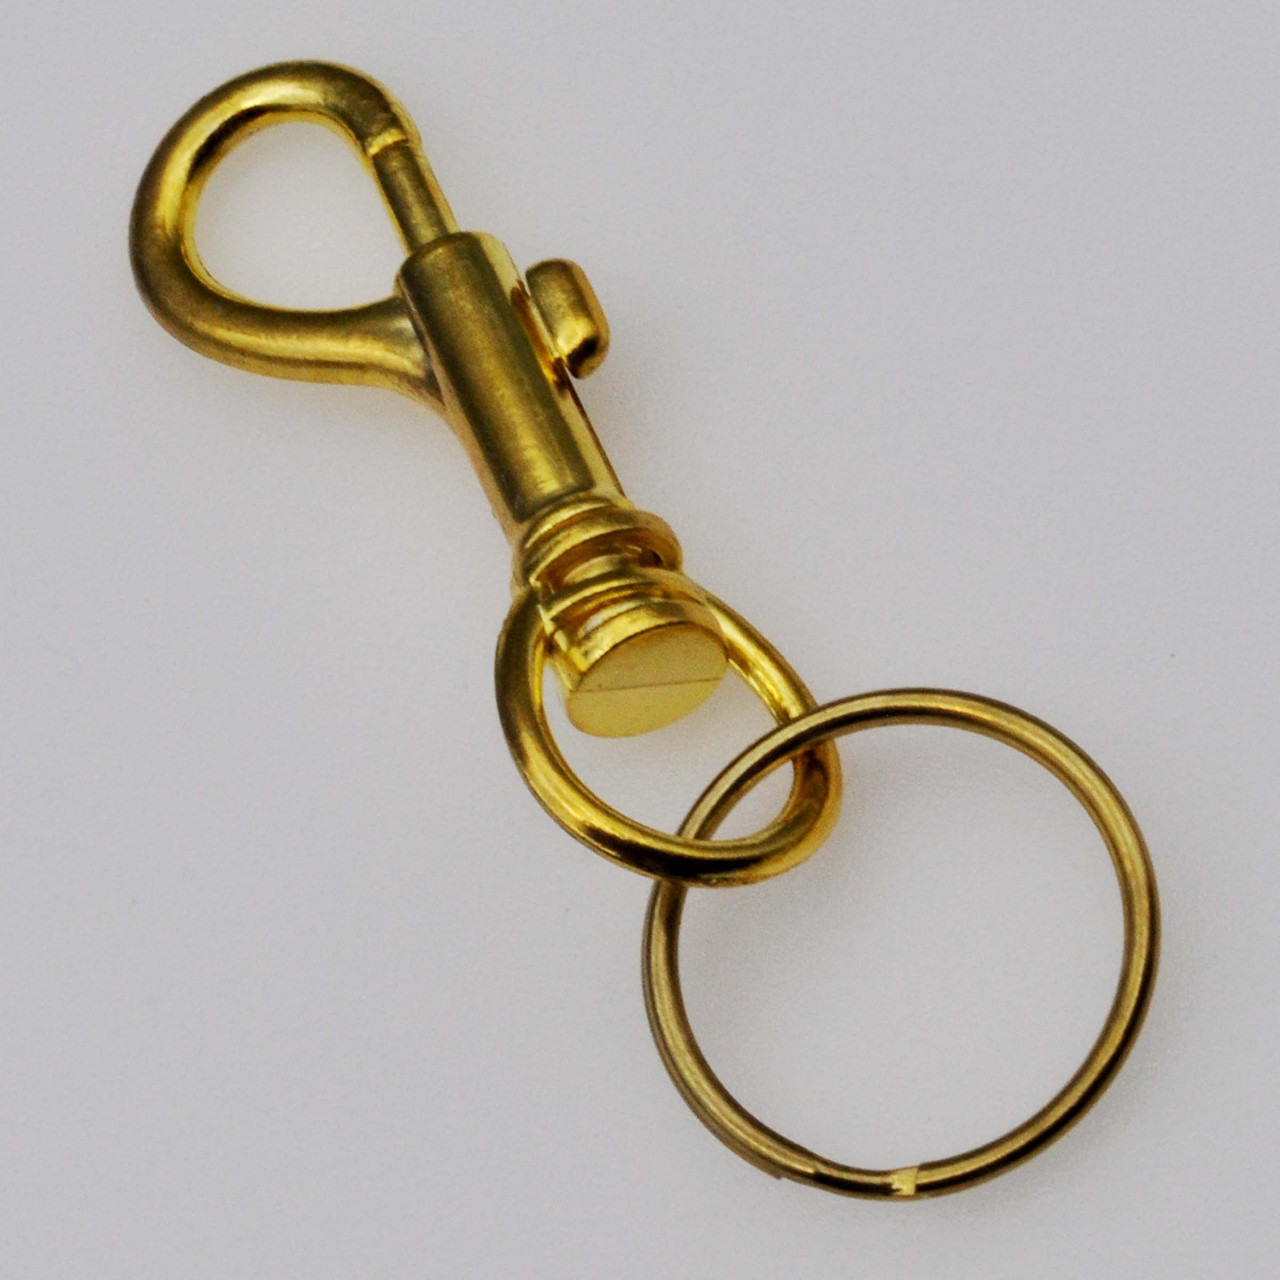 Shop for and Buy Bonanza Clip Economy Snap Clip Key Ring - Brass Plated at  . Large selection and bulk discounts available.